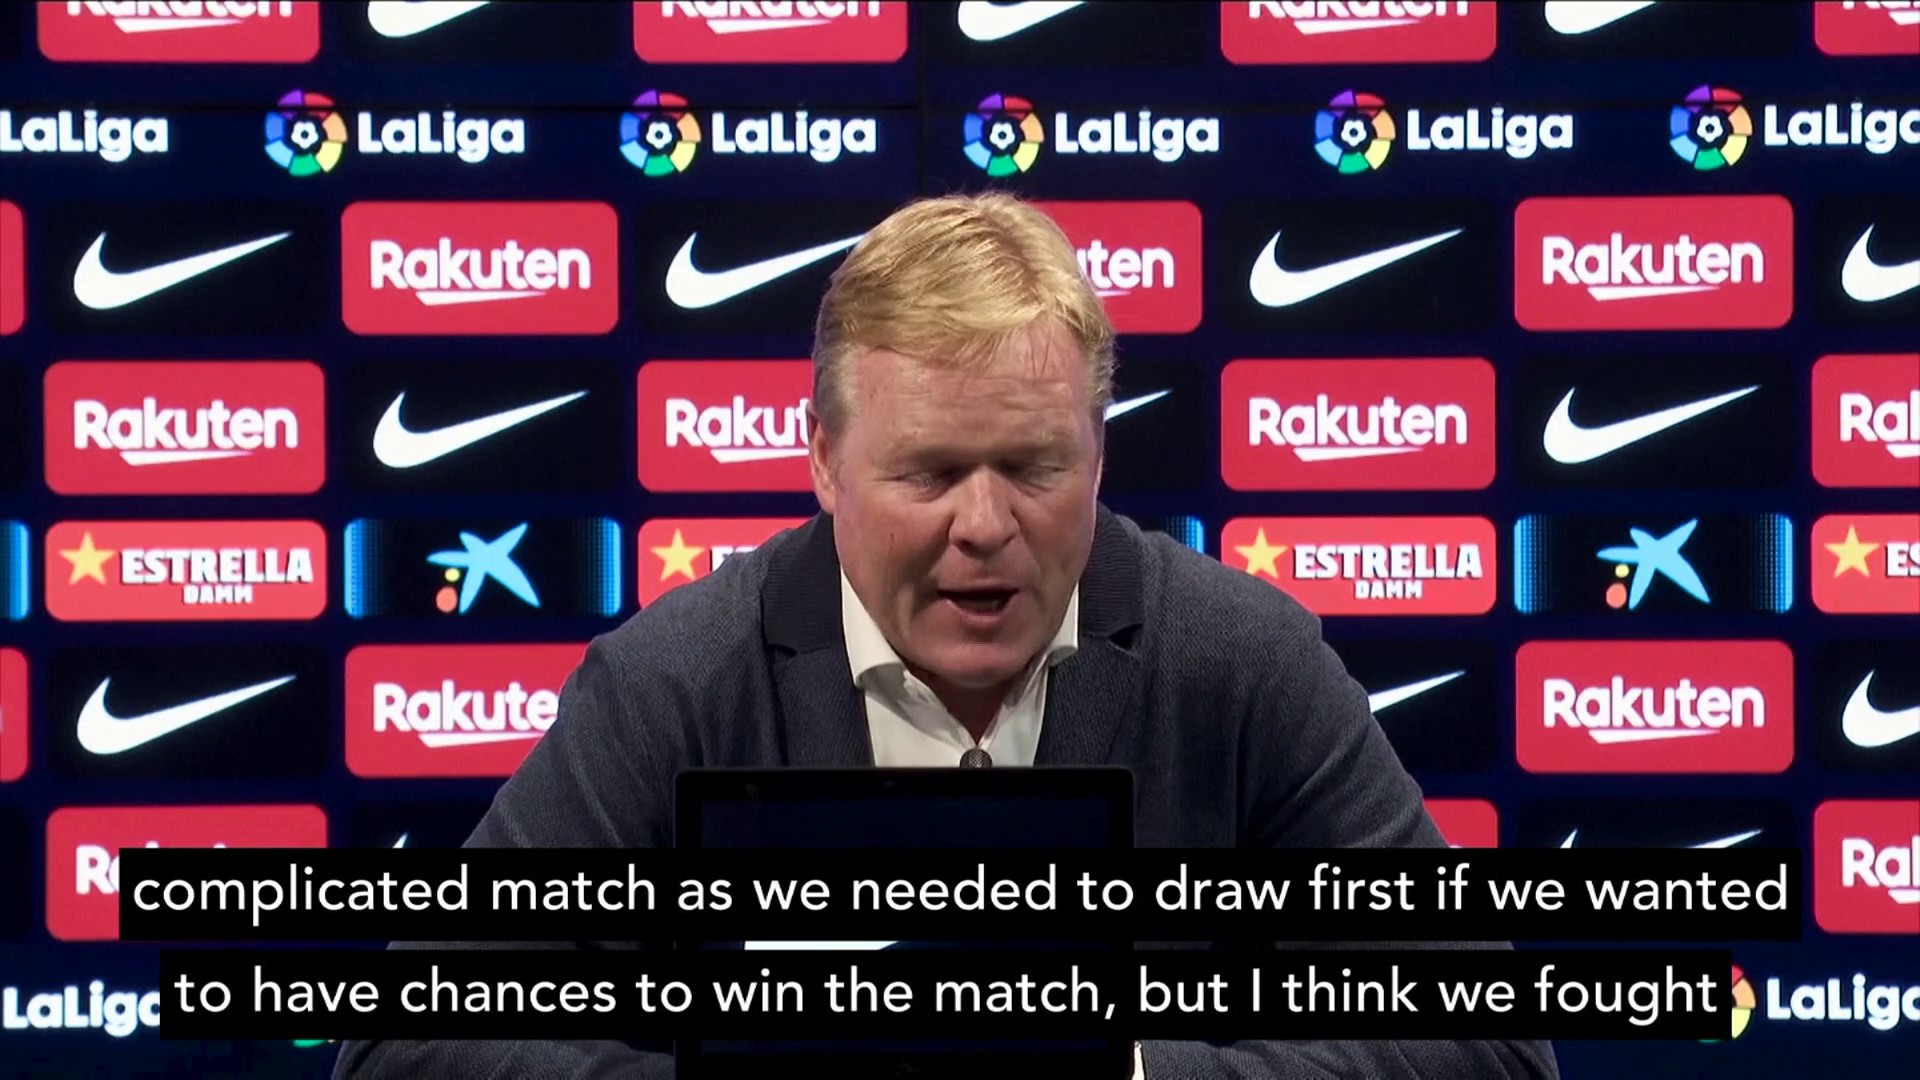 Koeman: "You cannot be happy to draw against Granada at home"